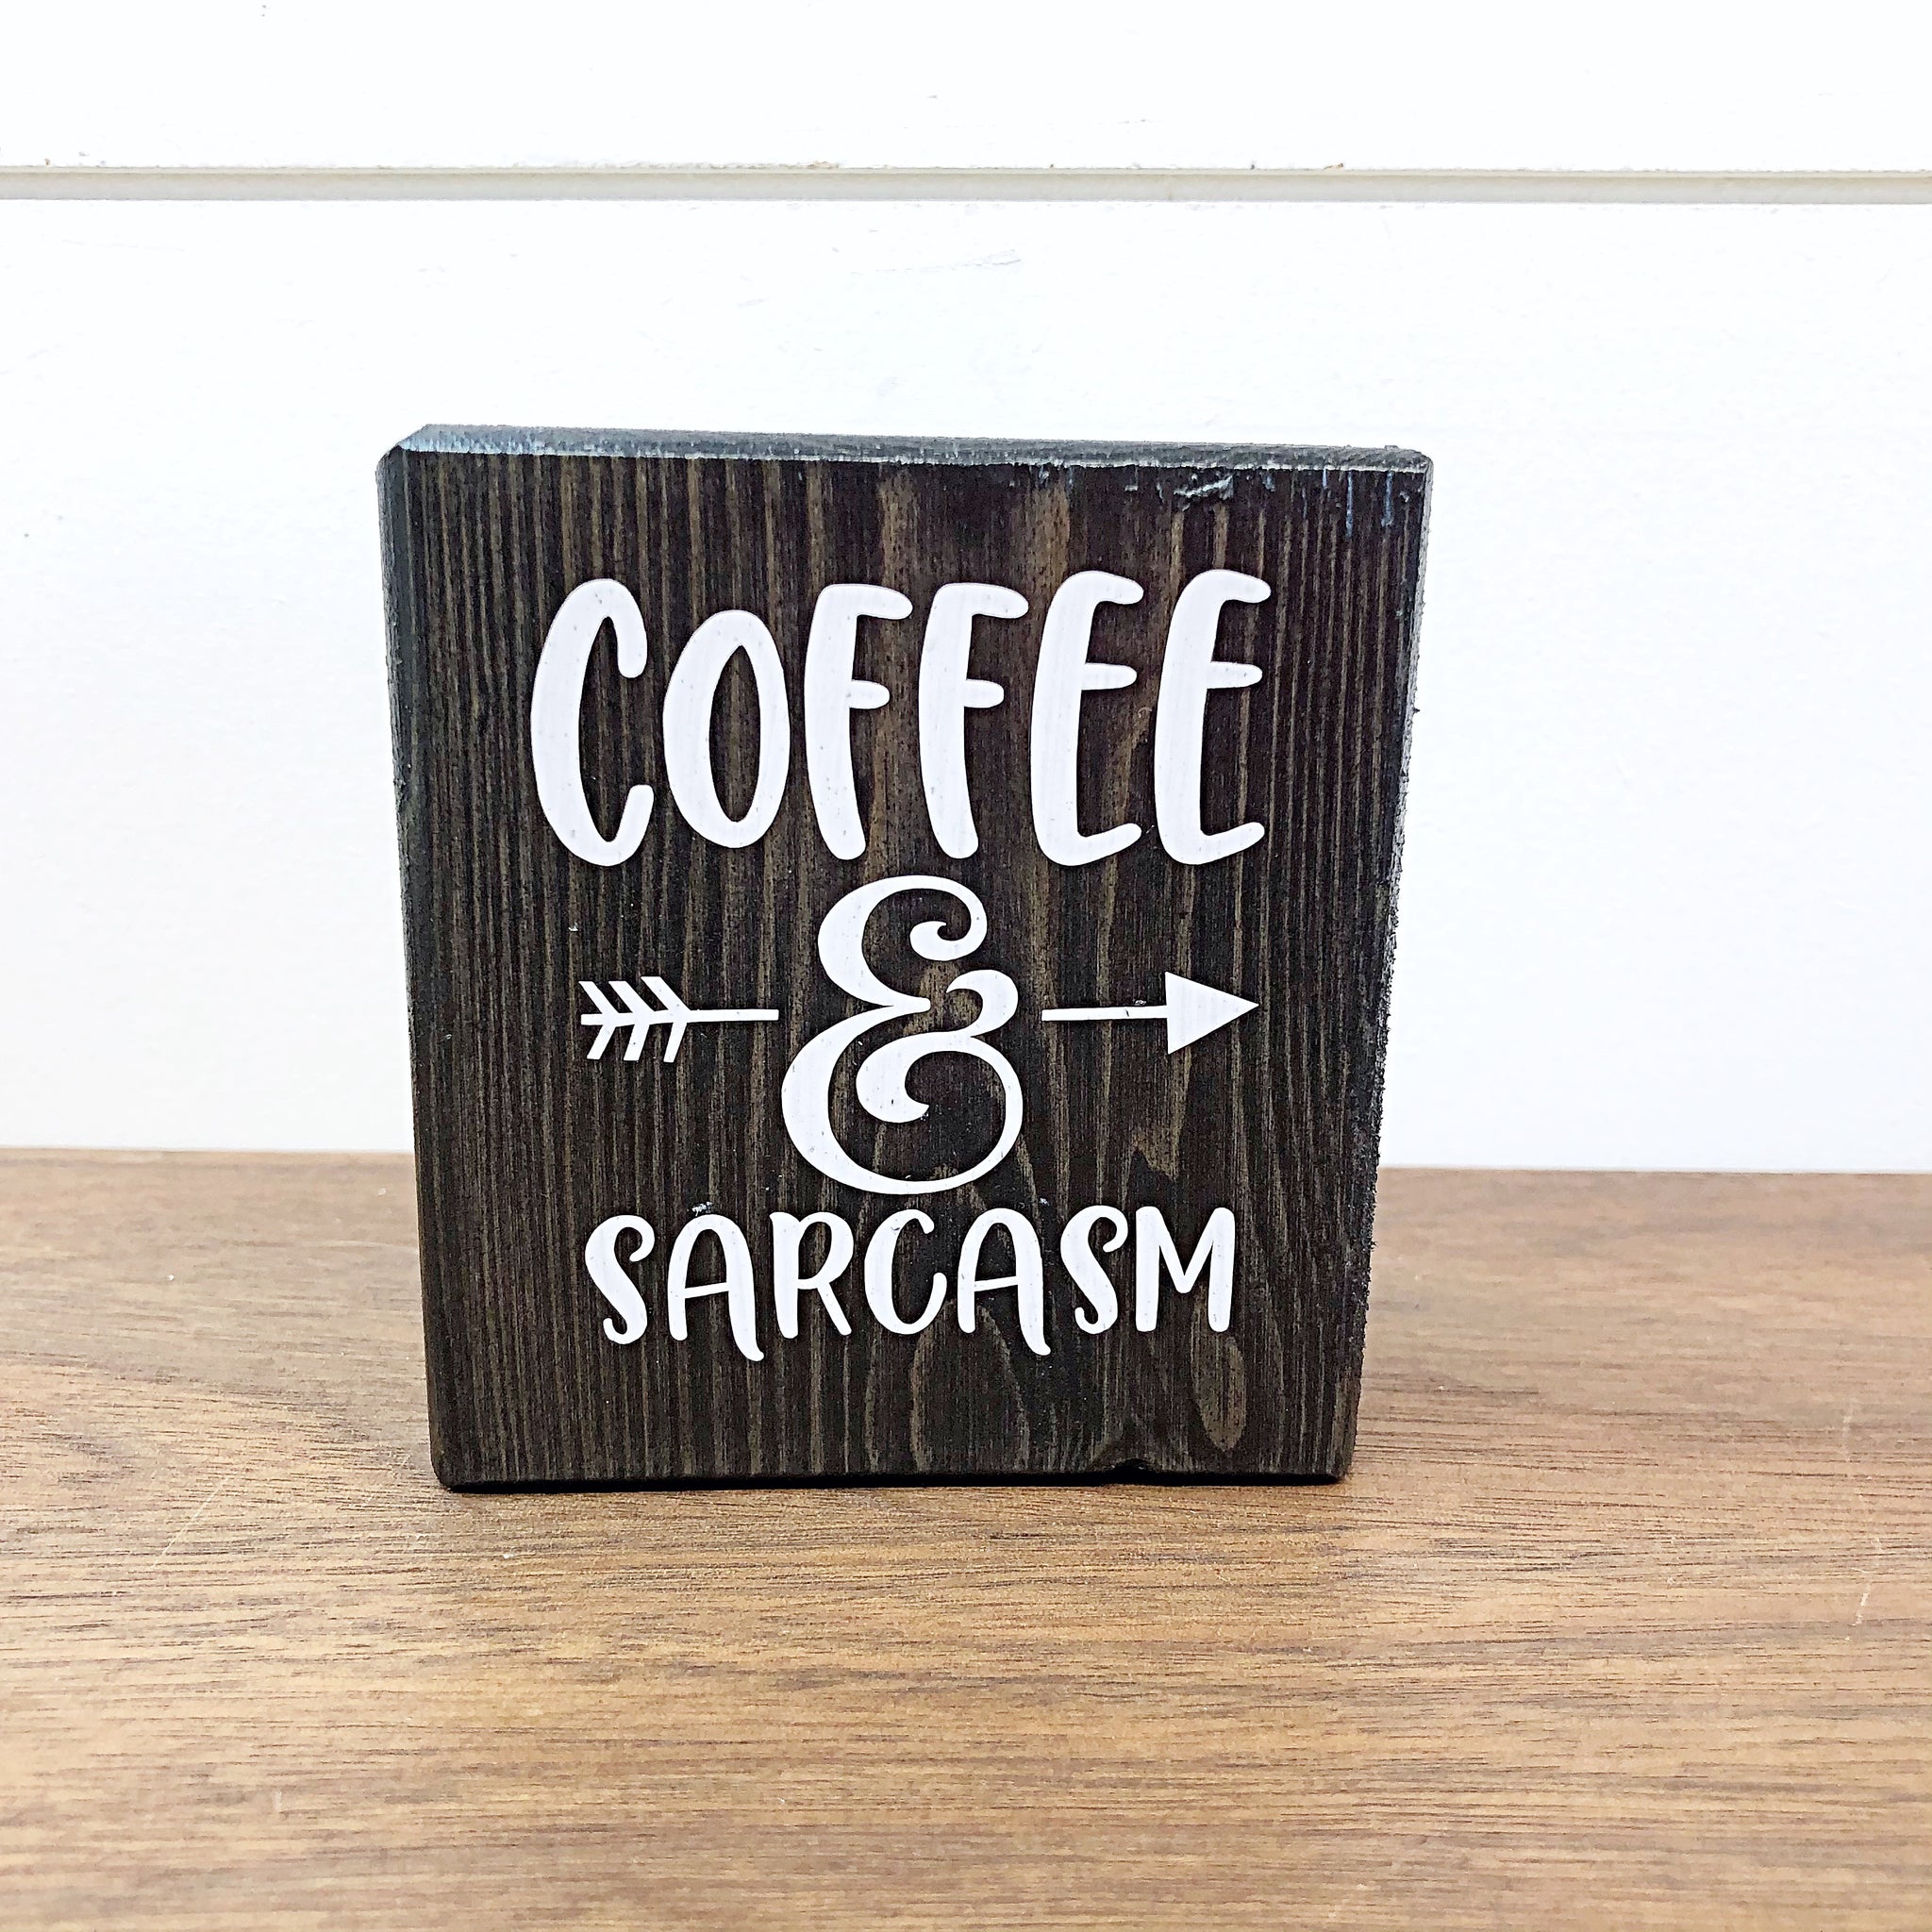 Coffee and Sarcasm Mini Block, 3 Inch Block Sign for Tiered Tray or Shelf Decor